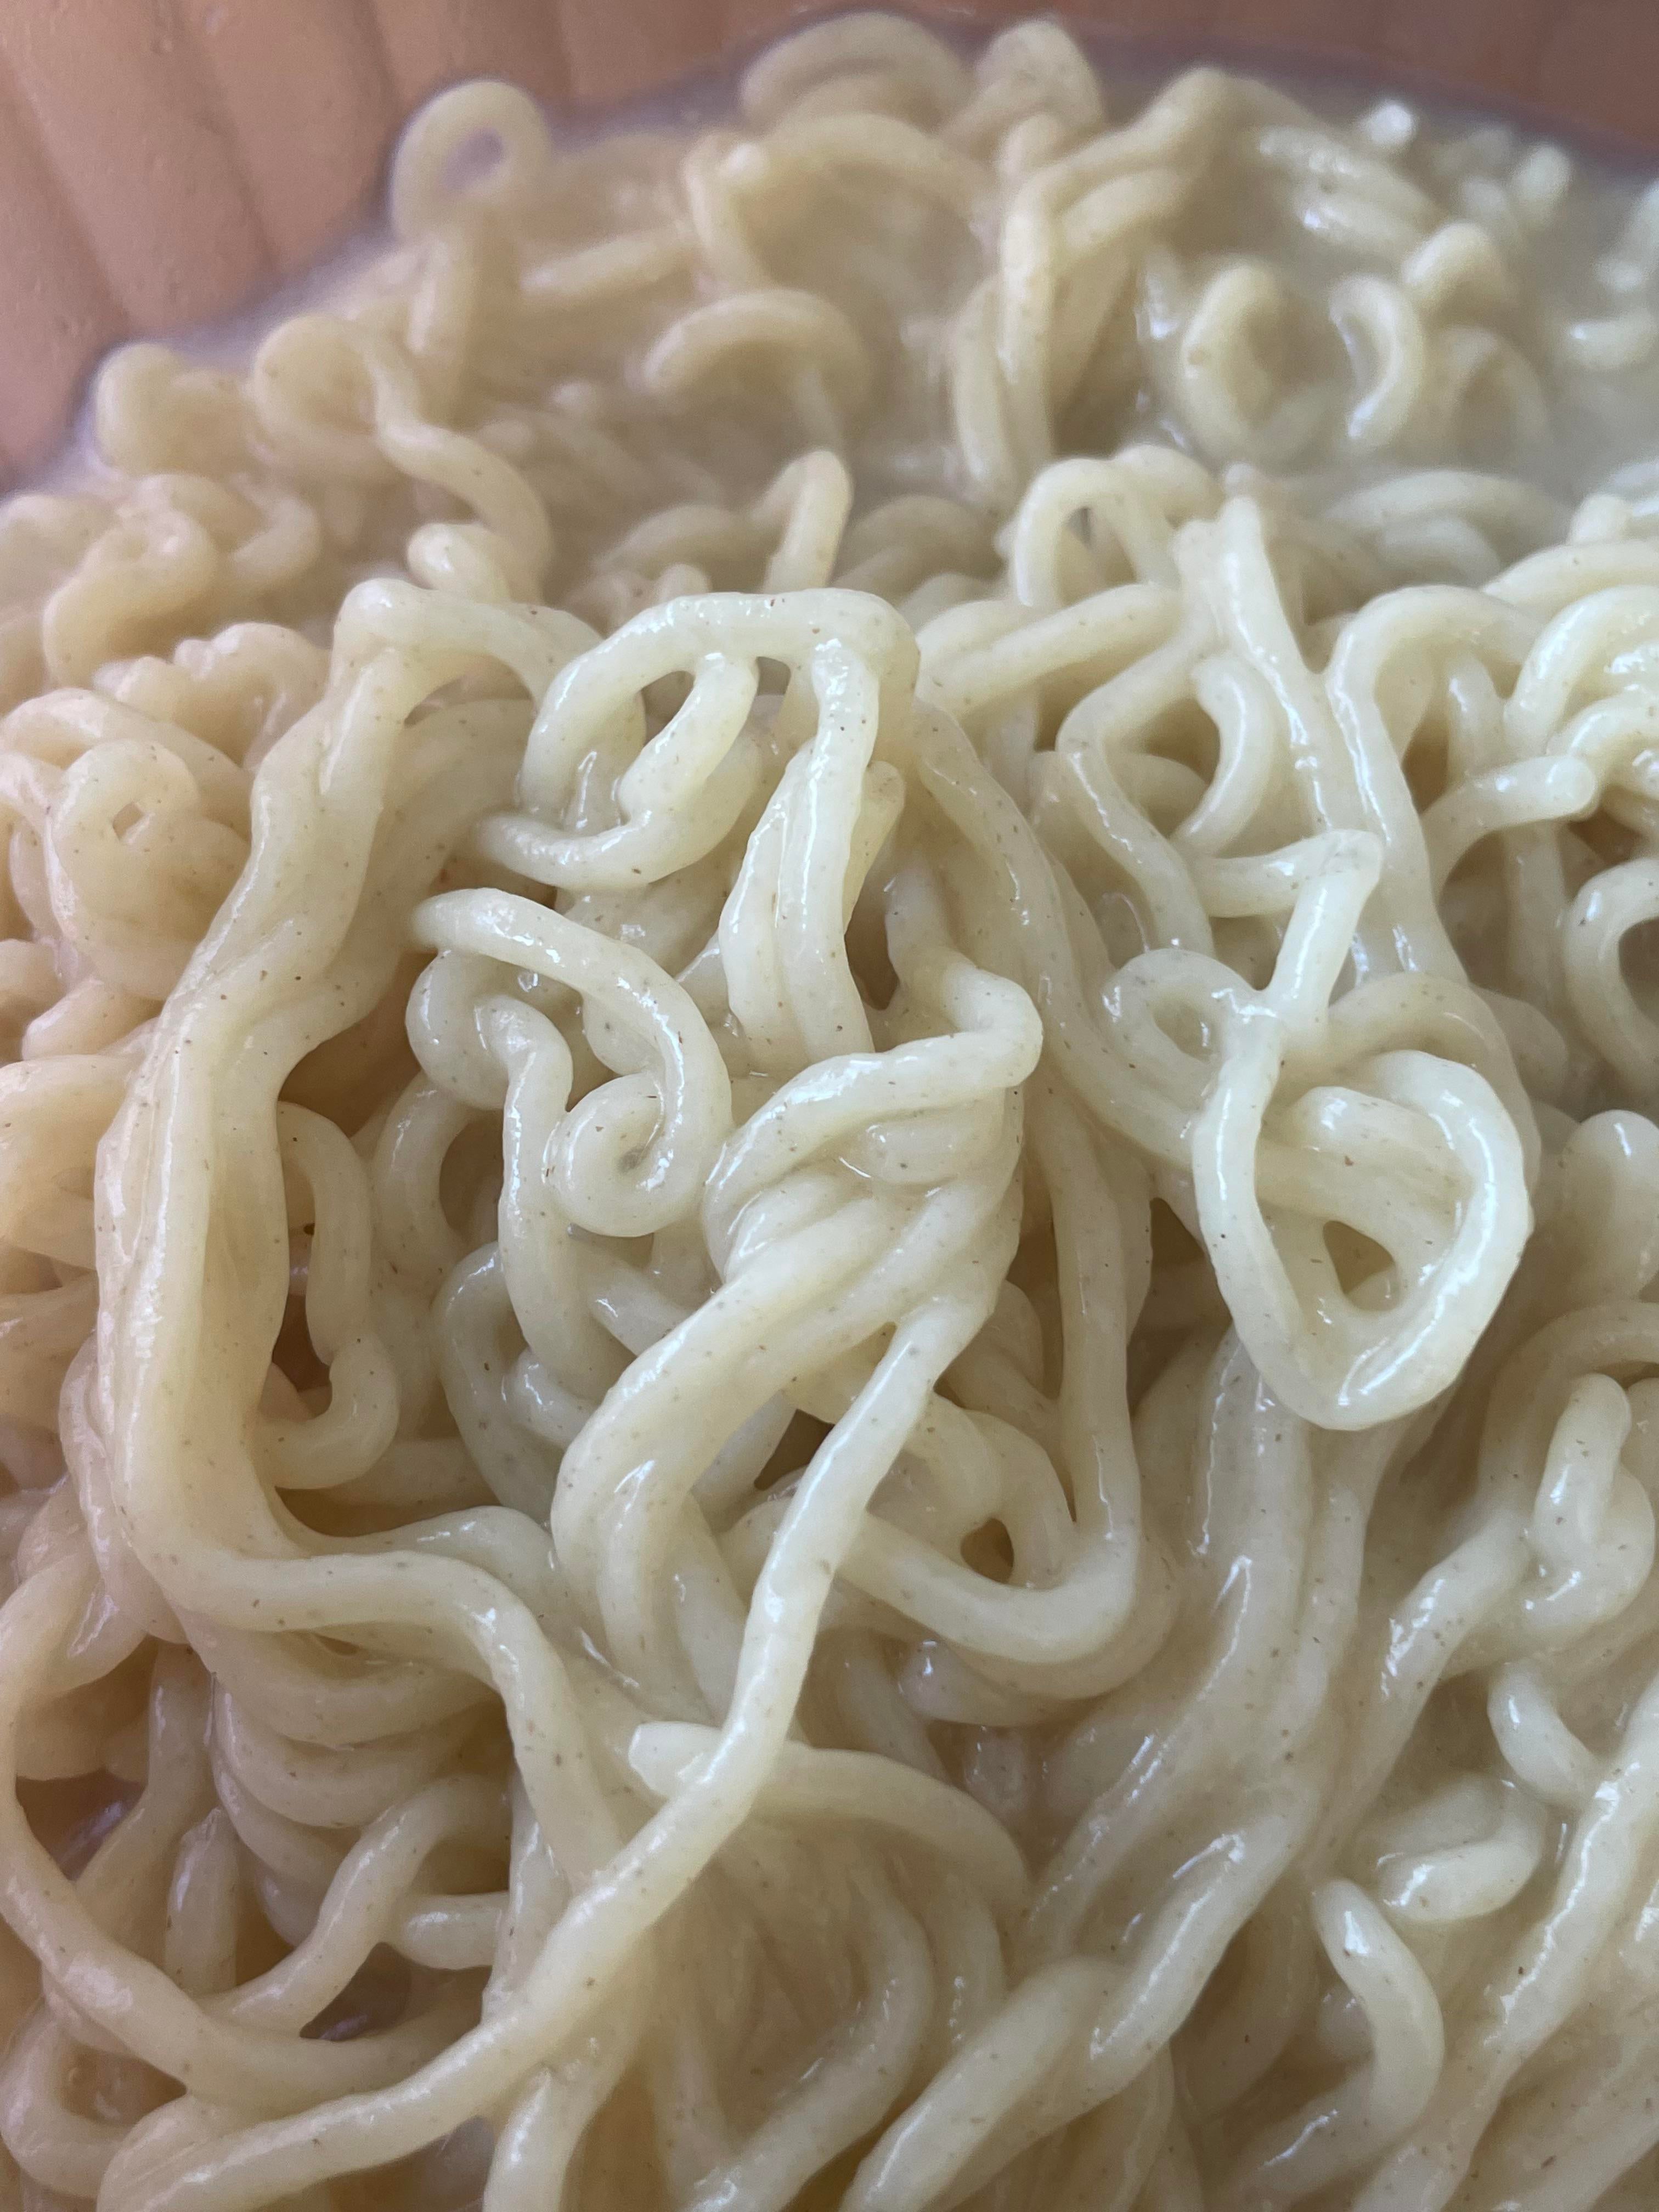 Do these small black/dark brown dots in the ramen noodles mean that ...